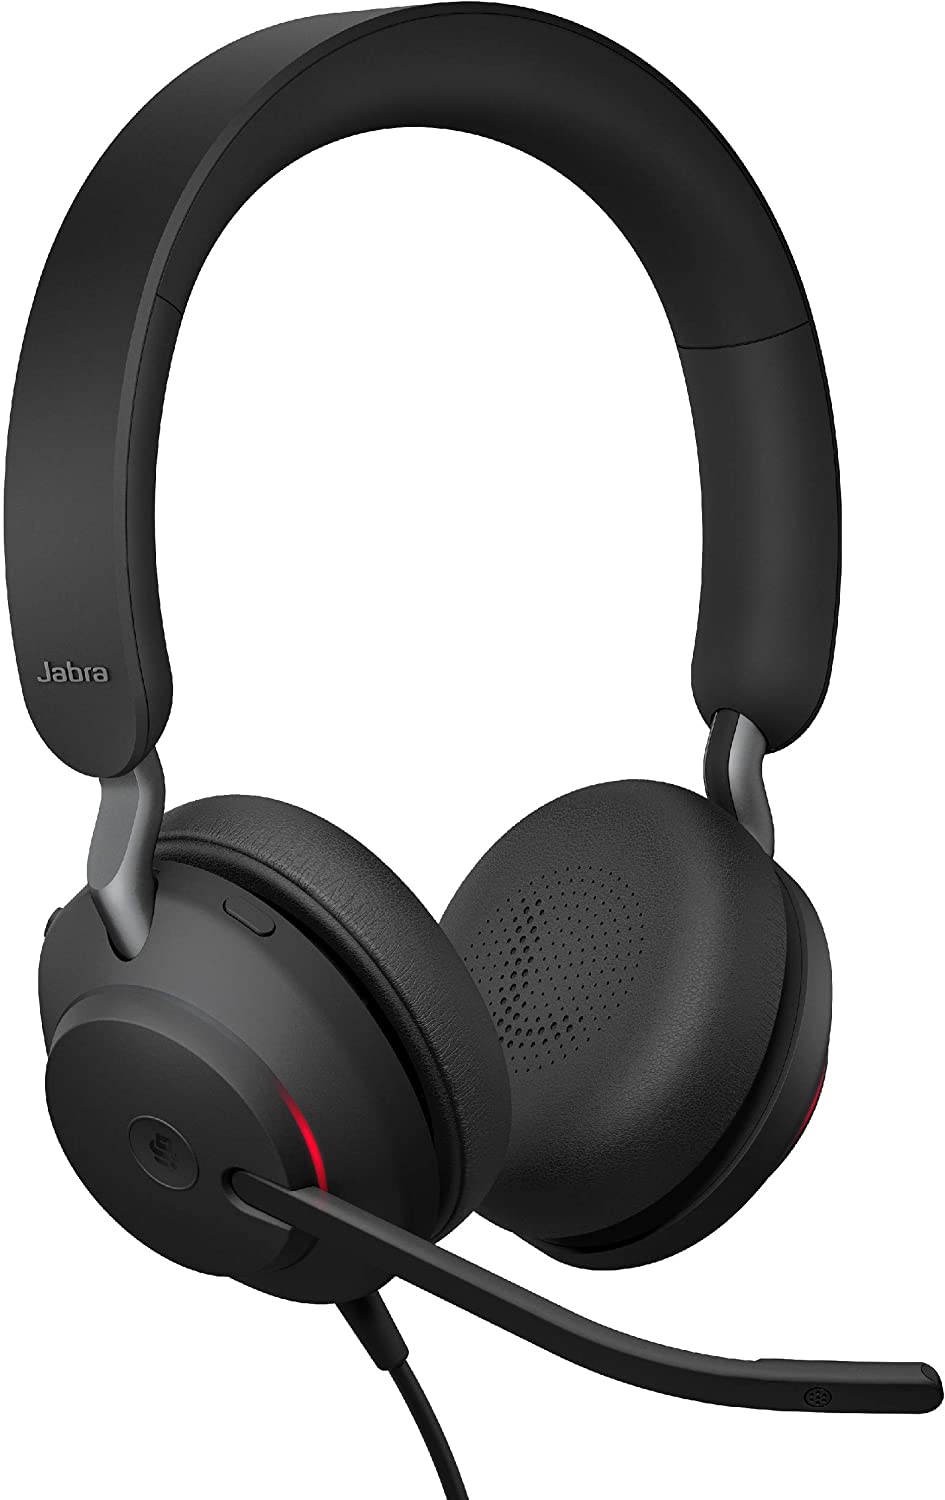 Take up to $100 off on these excellent Jabra headphones for Cyber Monday 4